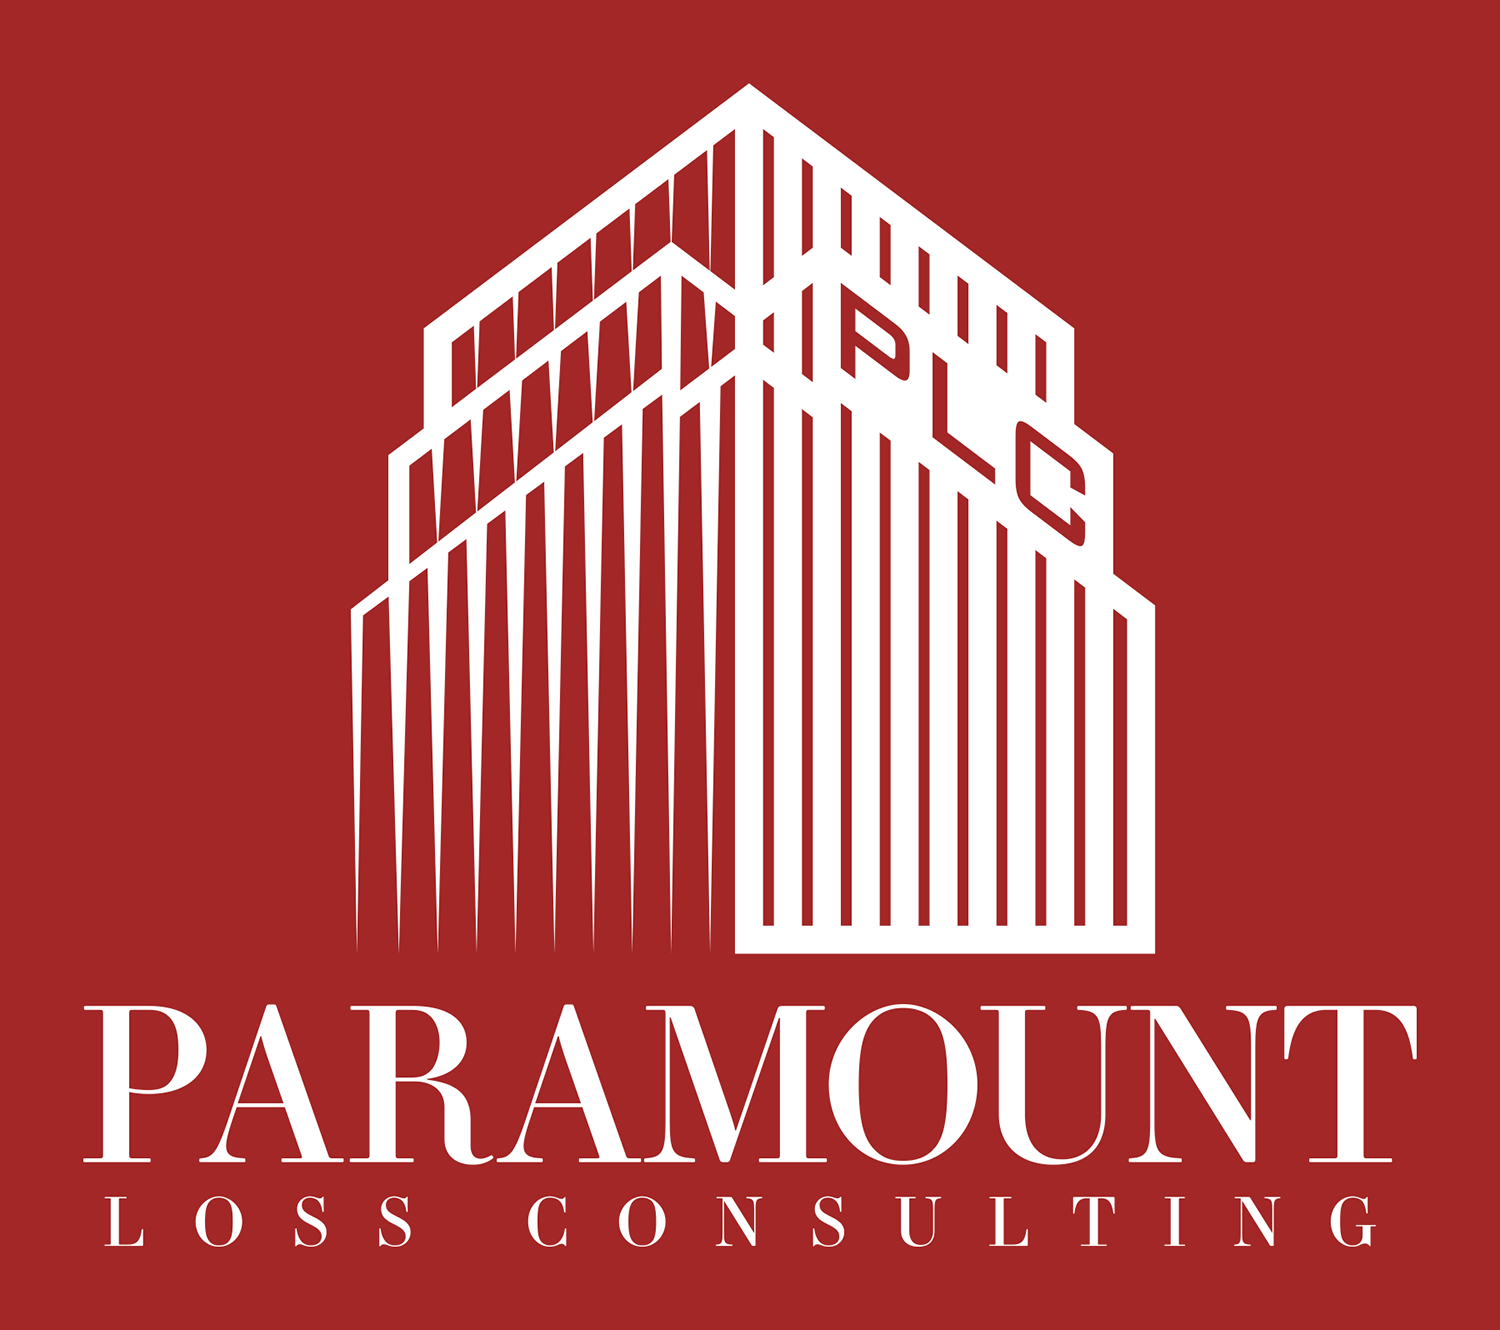 Paramount Loss Consulting